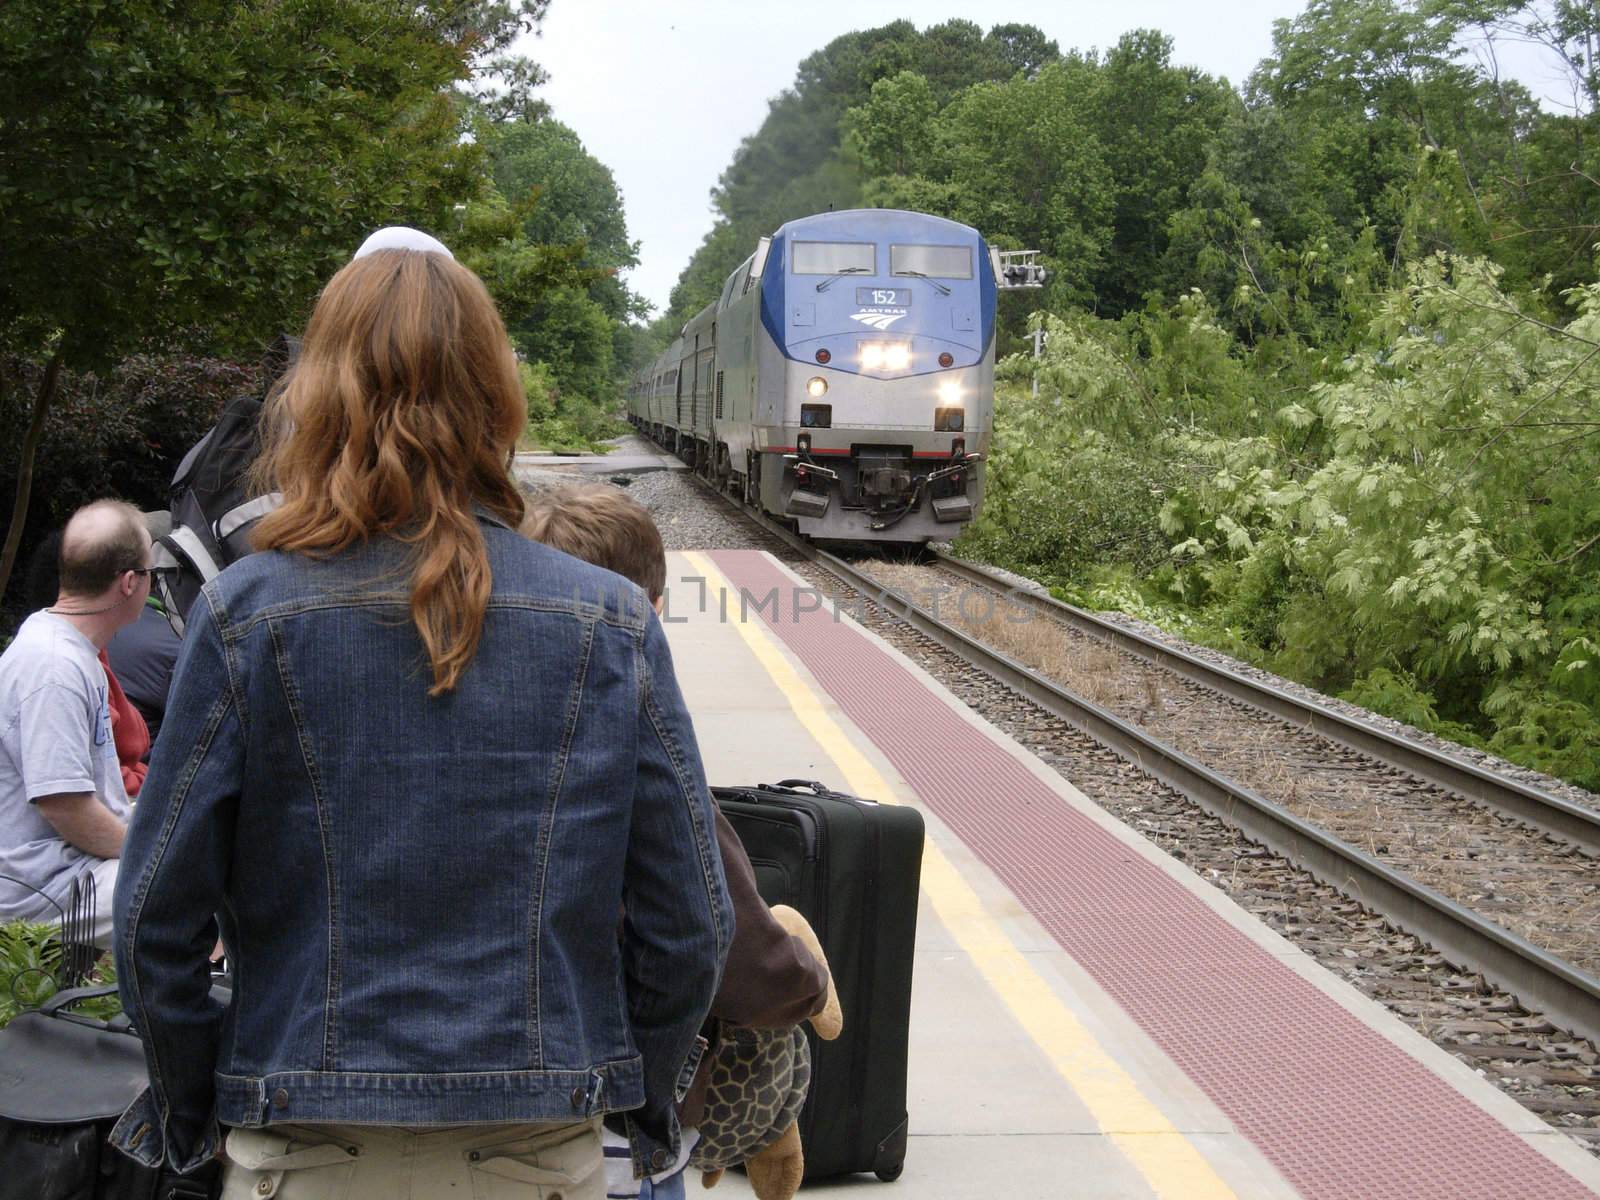 Waiting for the arriving Amtrak train at the Cary, NC train station on Saturday, May 24. Increased usage of the still reasonably priced train may be a result of the high cost of driving.